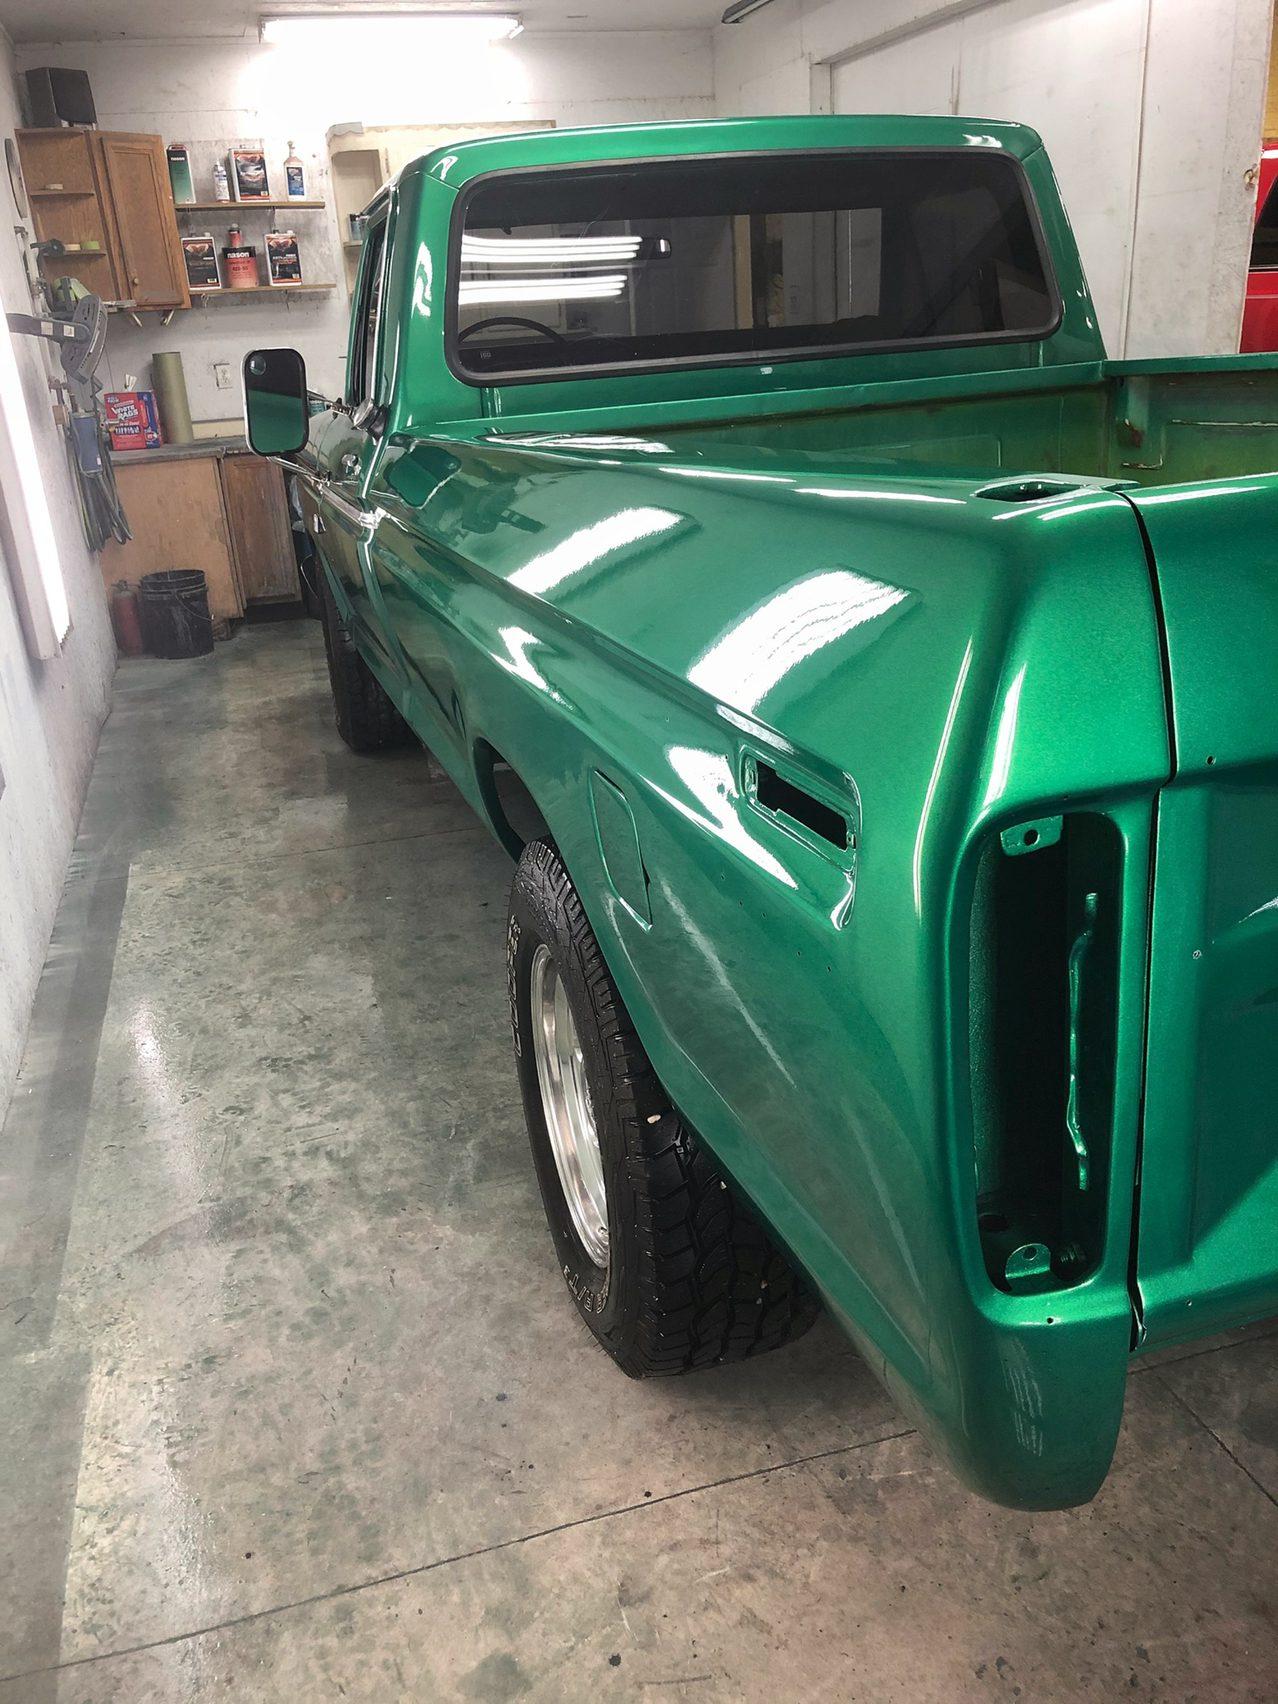 73 Restore Project - Page 11 - Ford Truck Enthusiasts Forums